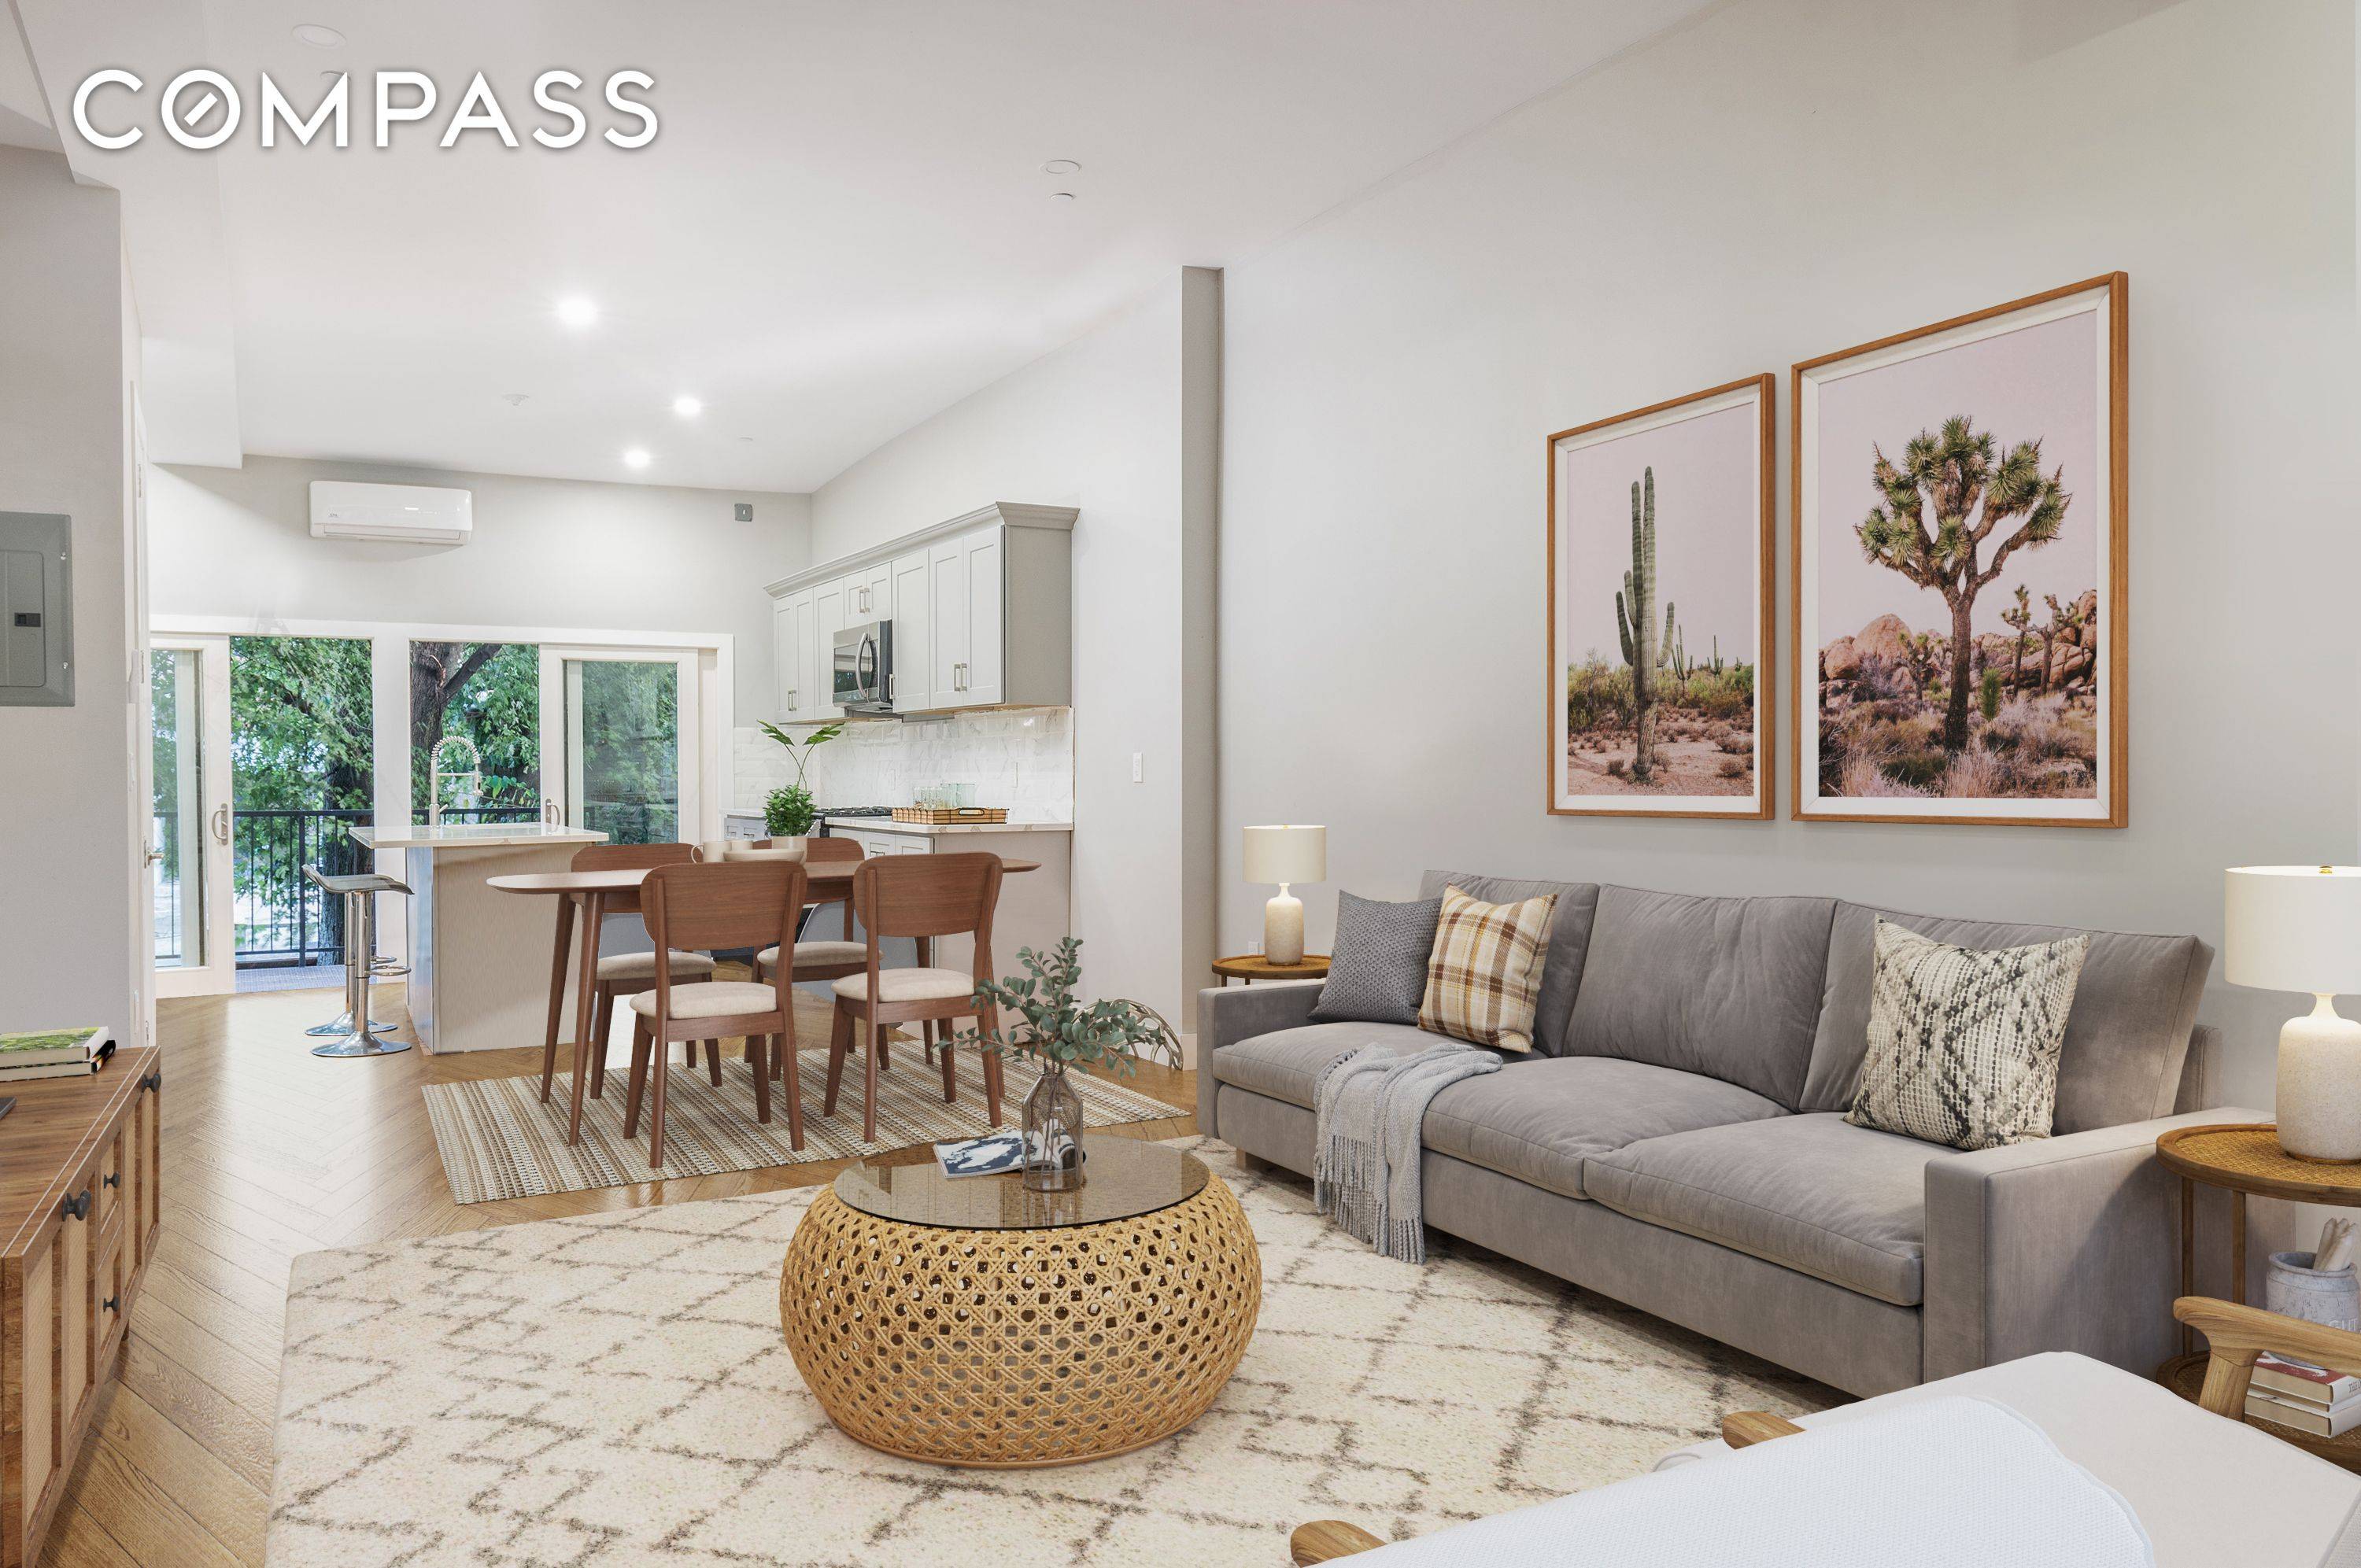 This turn of the century Crown Heights two family has been beautifully renovated inside and out to create an outstanding opportunity for investors or homebuyers seeking an income generating rental ...